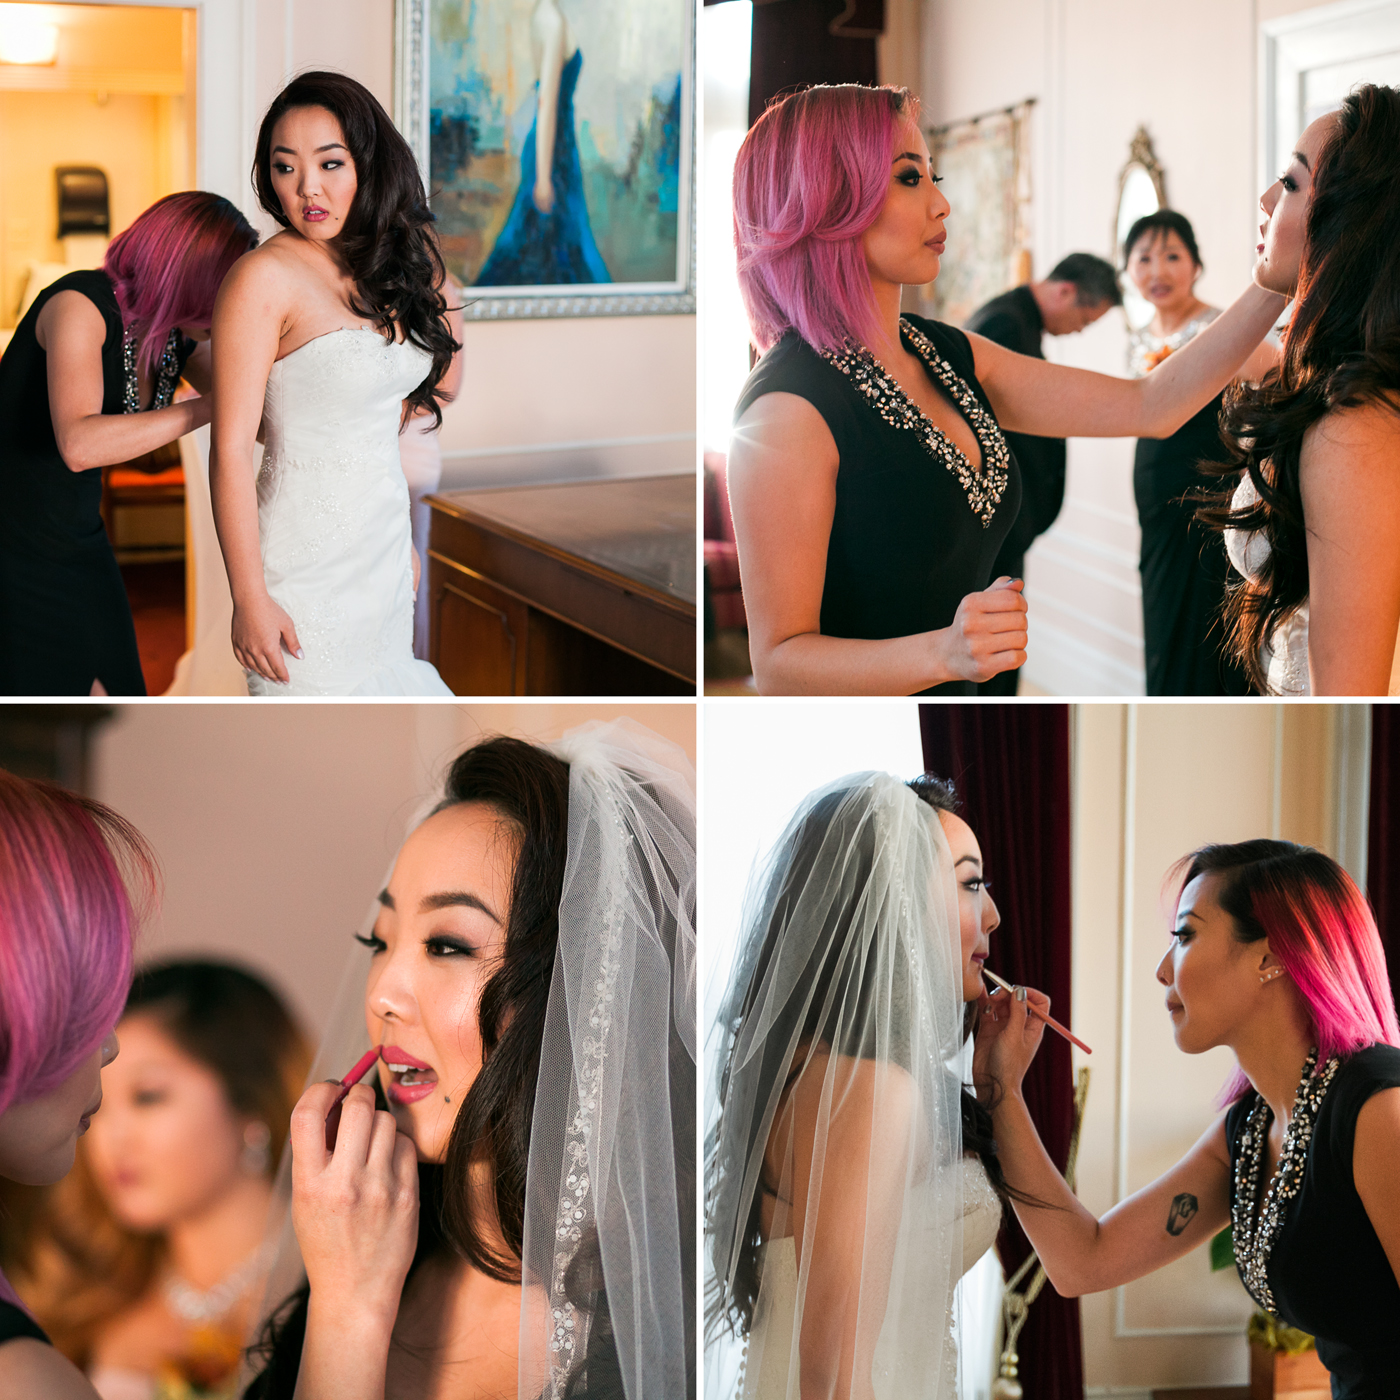 Last minute make up touches for this wedding bride 